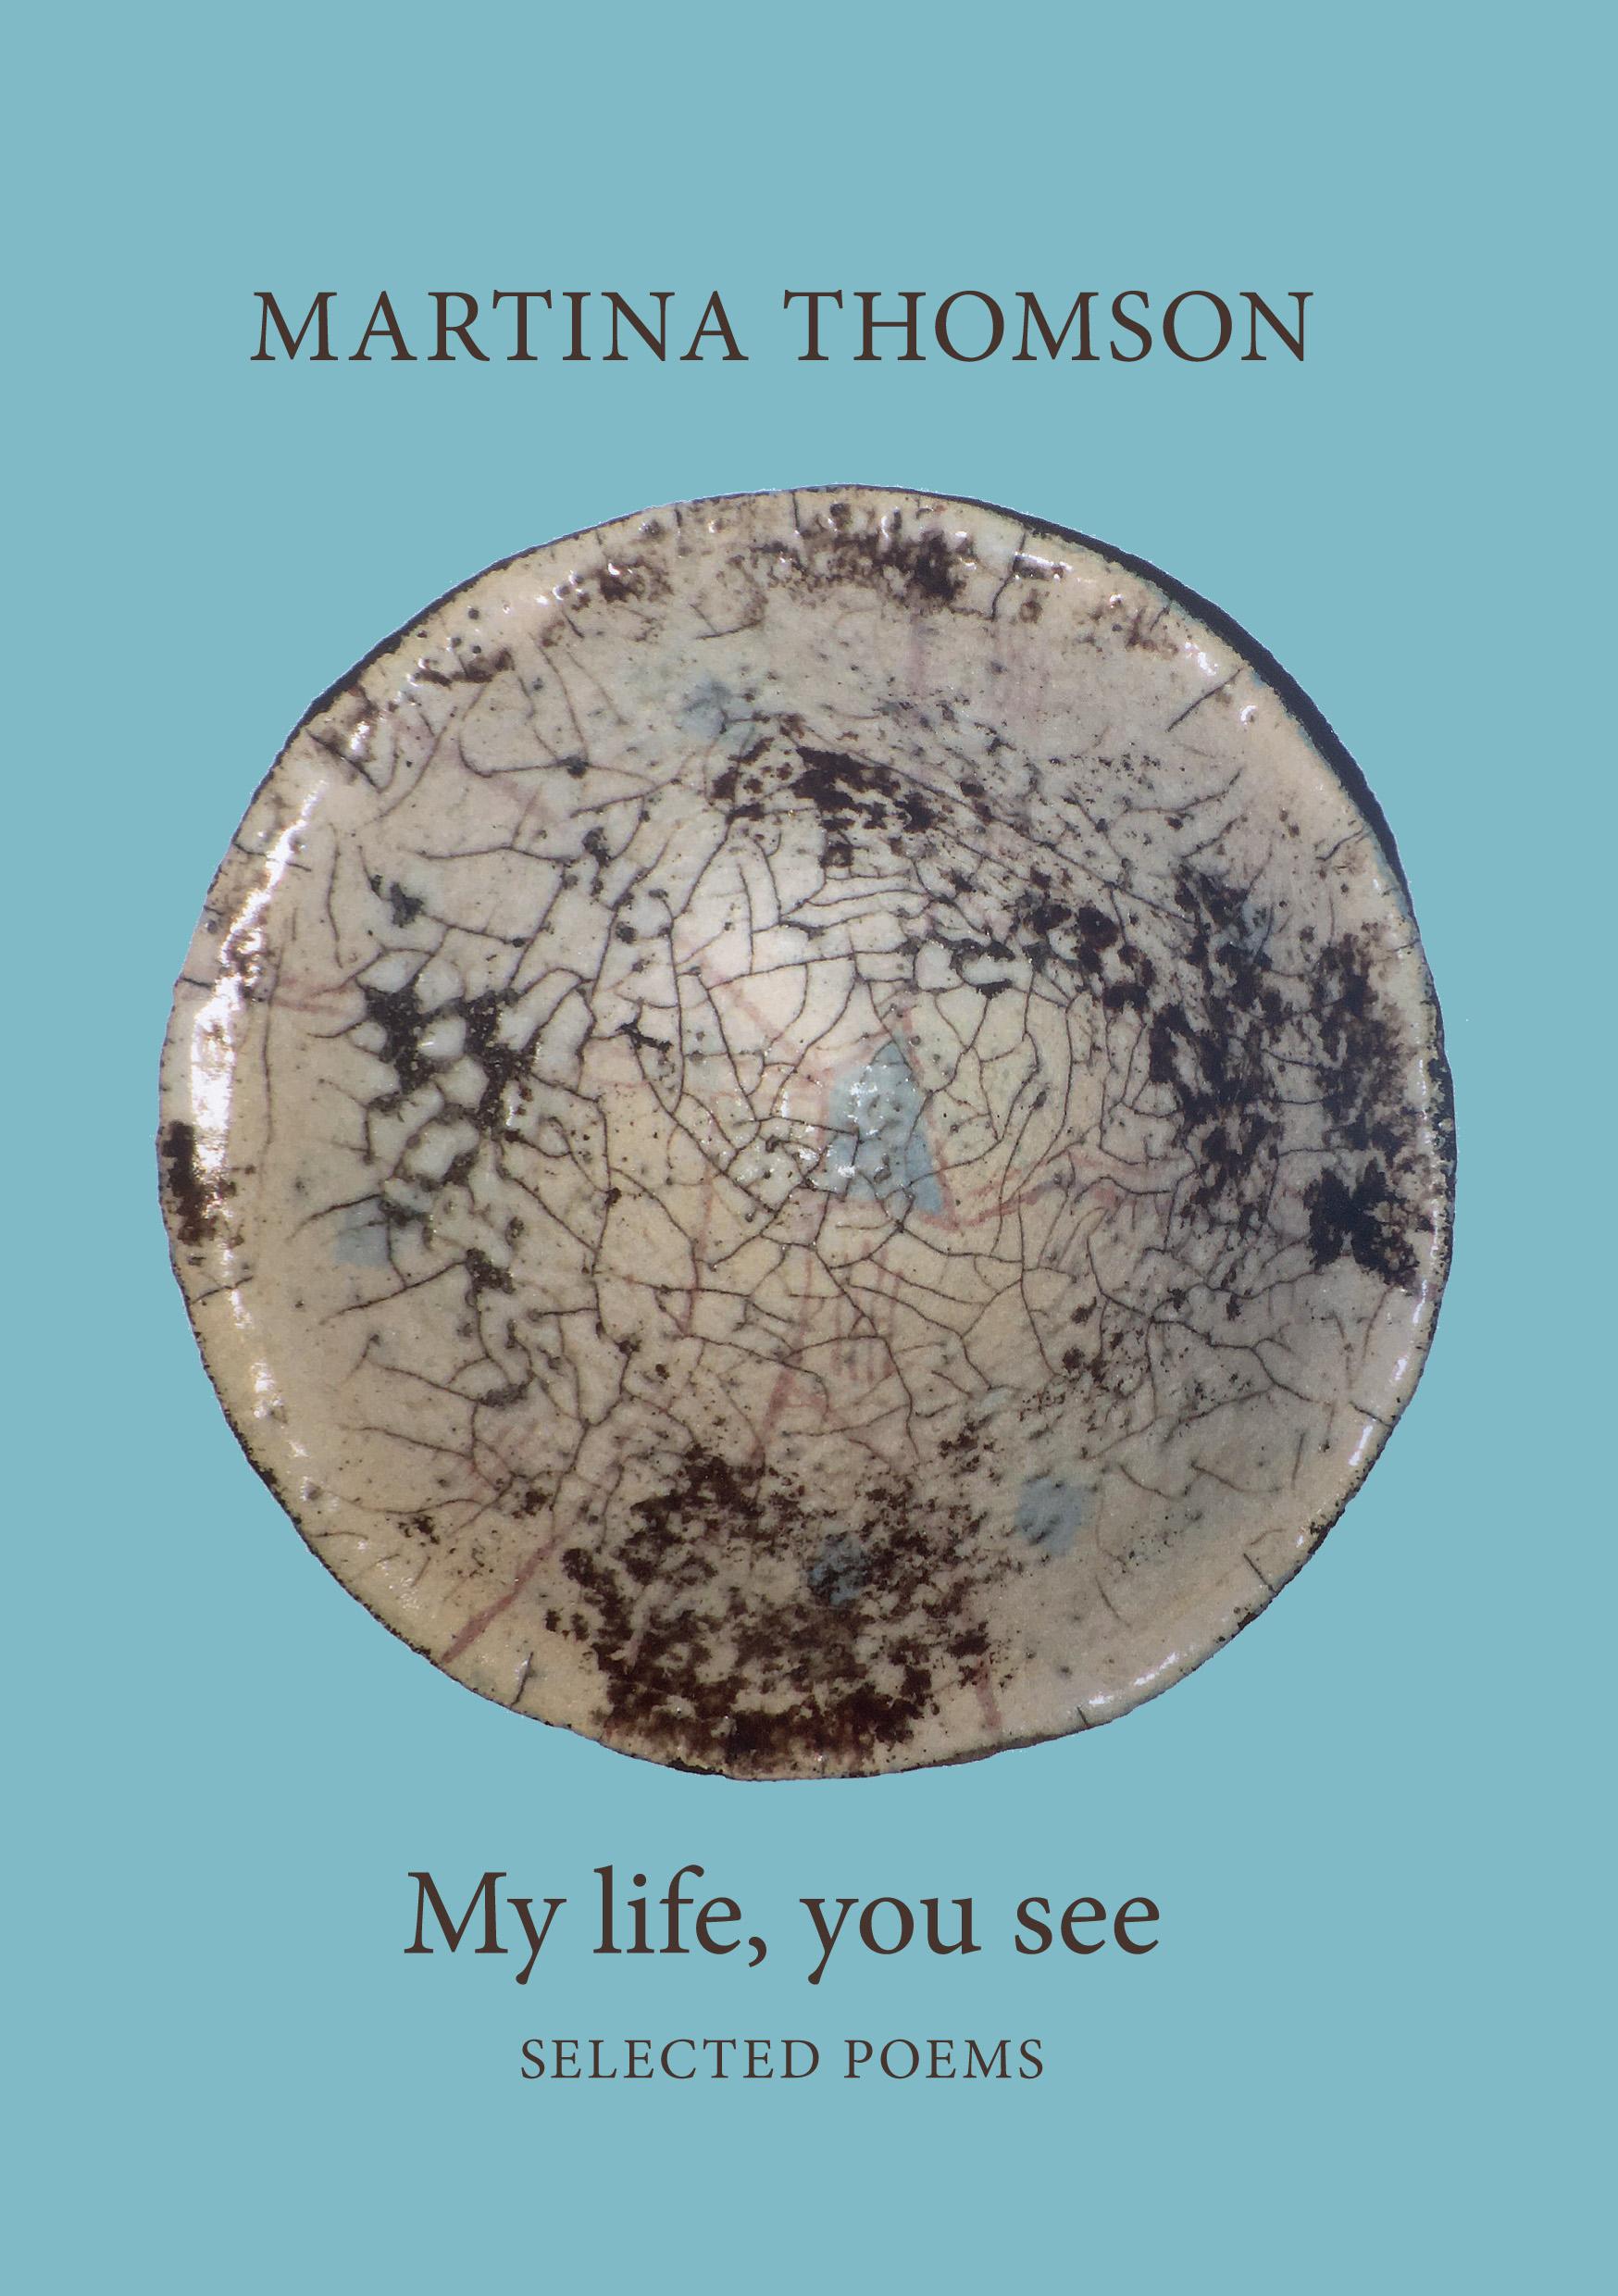 London Grip review of Martina Thomson’s ‘My Life You See’